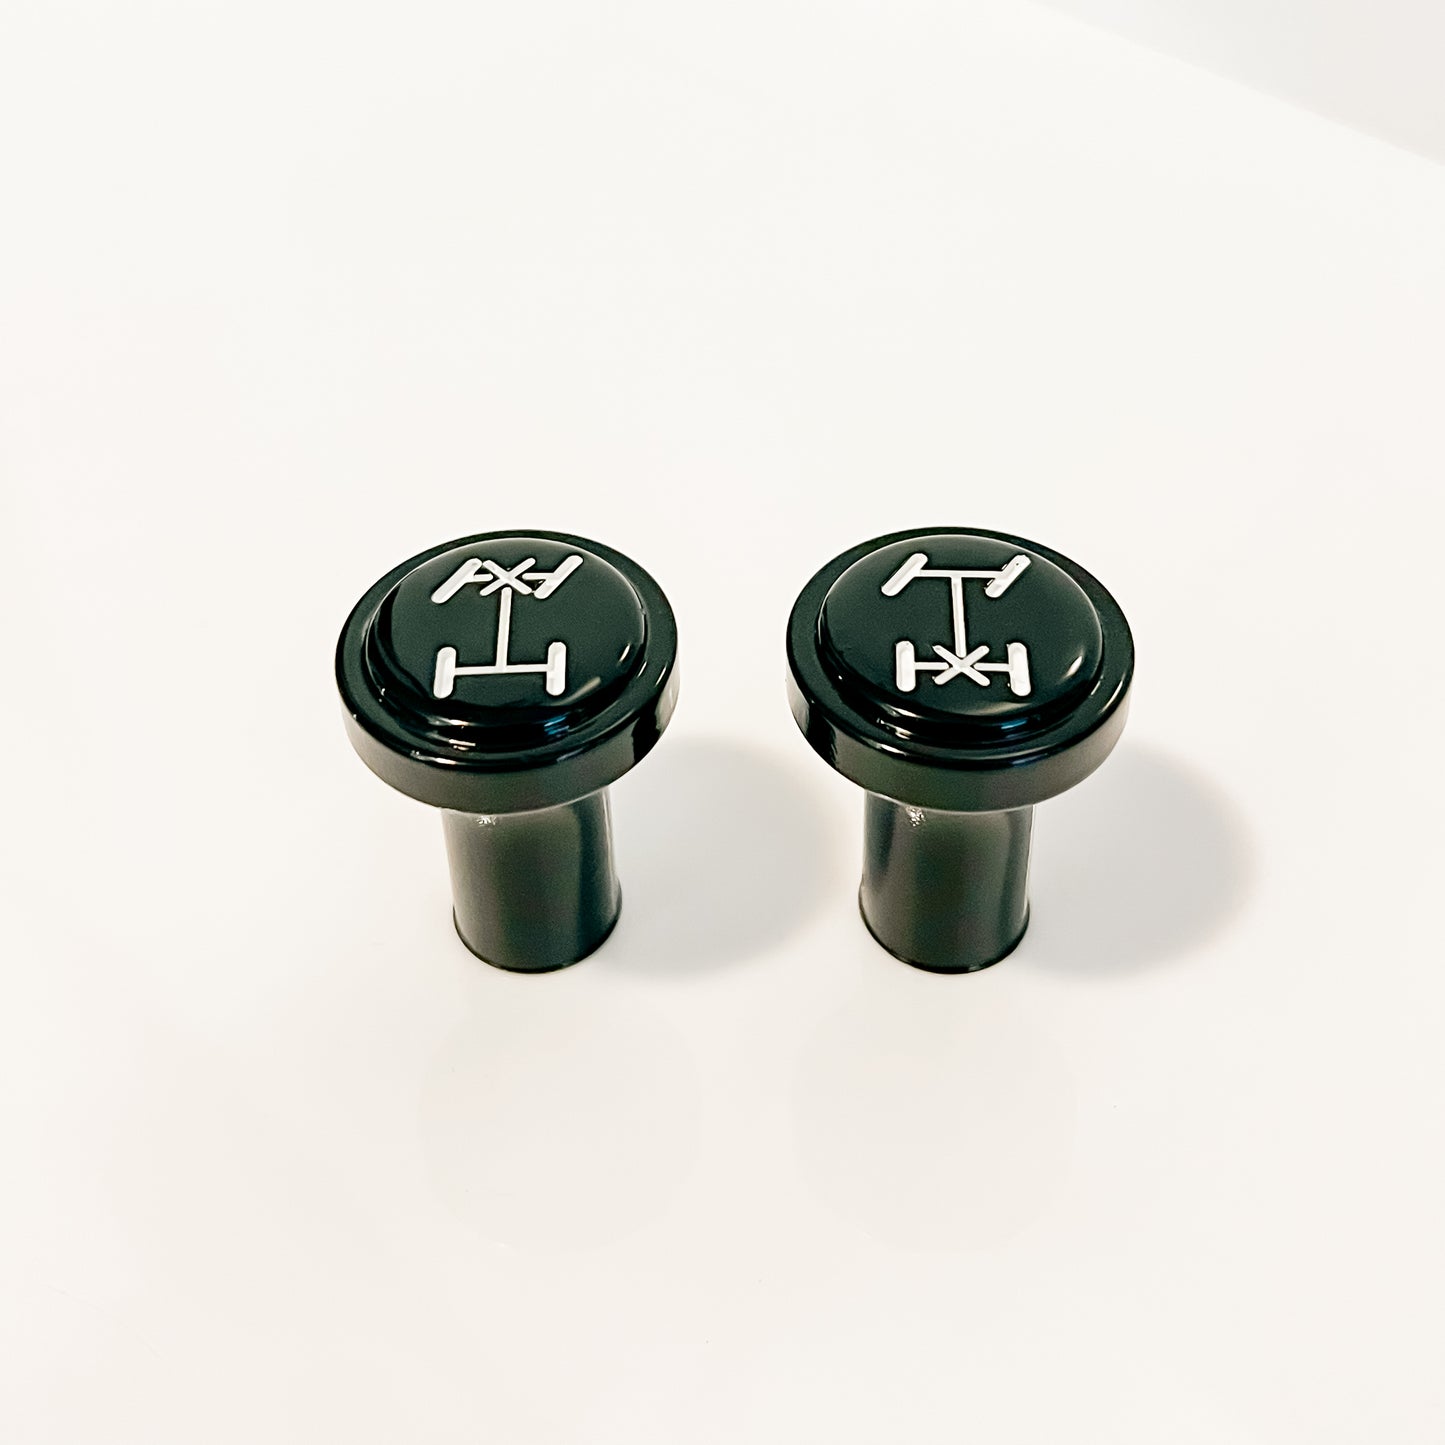 40 Series Pull Switch Knobs